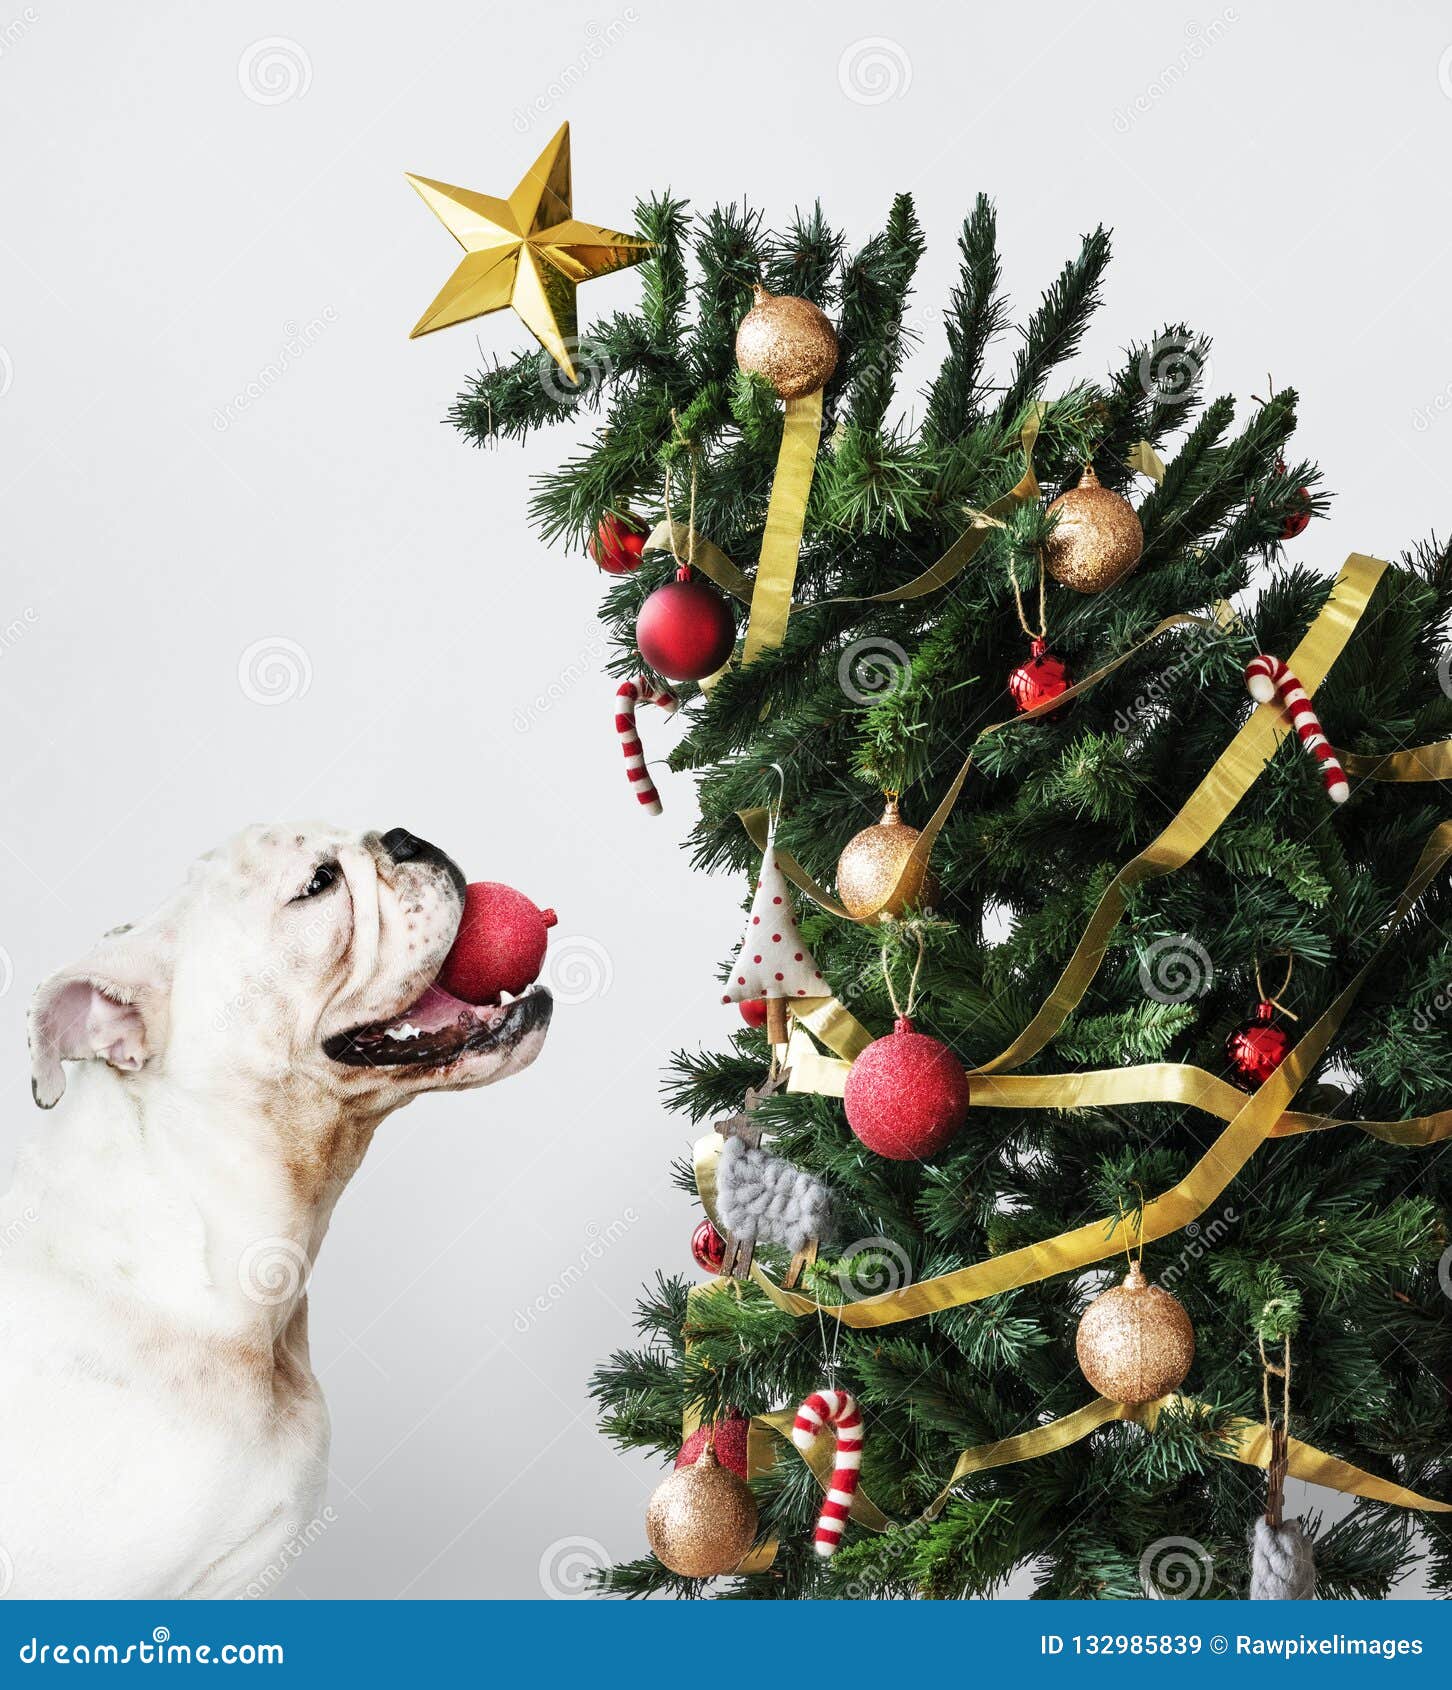 Adorable Bulldog Puppy Standing Next To A Christmas Tree